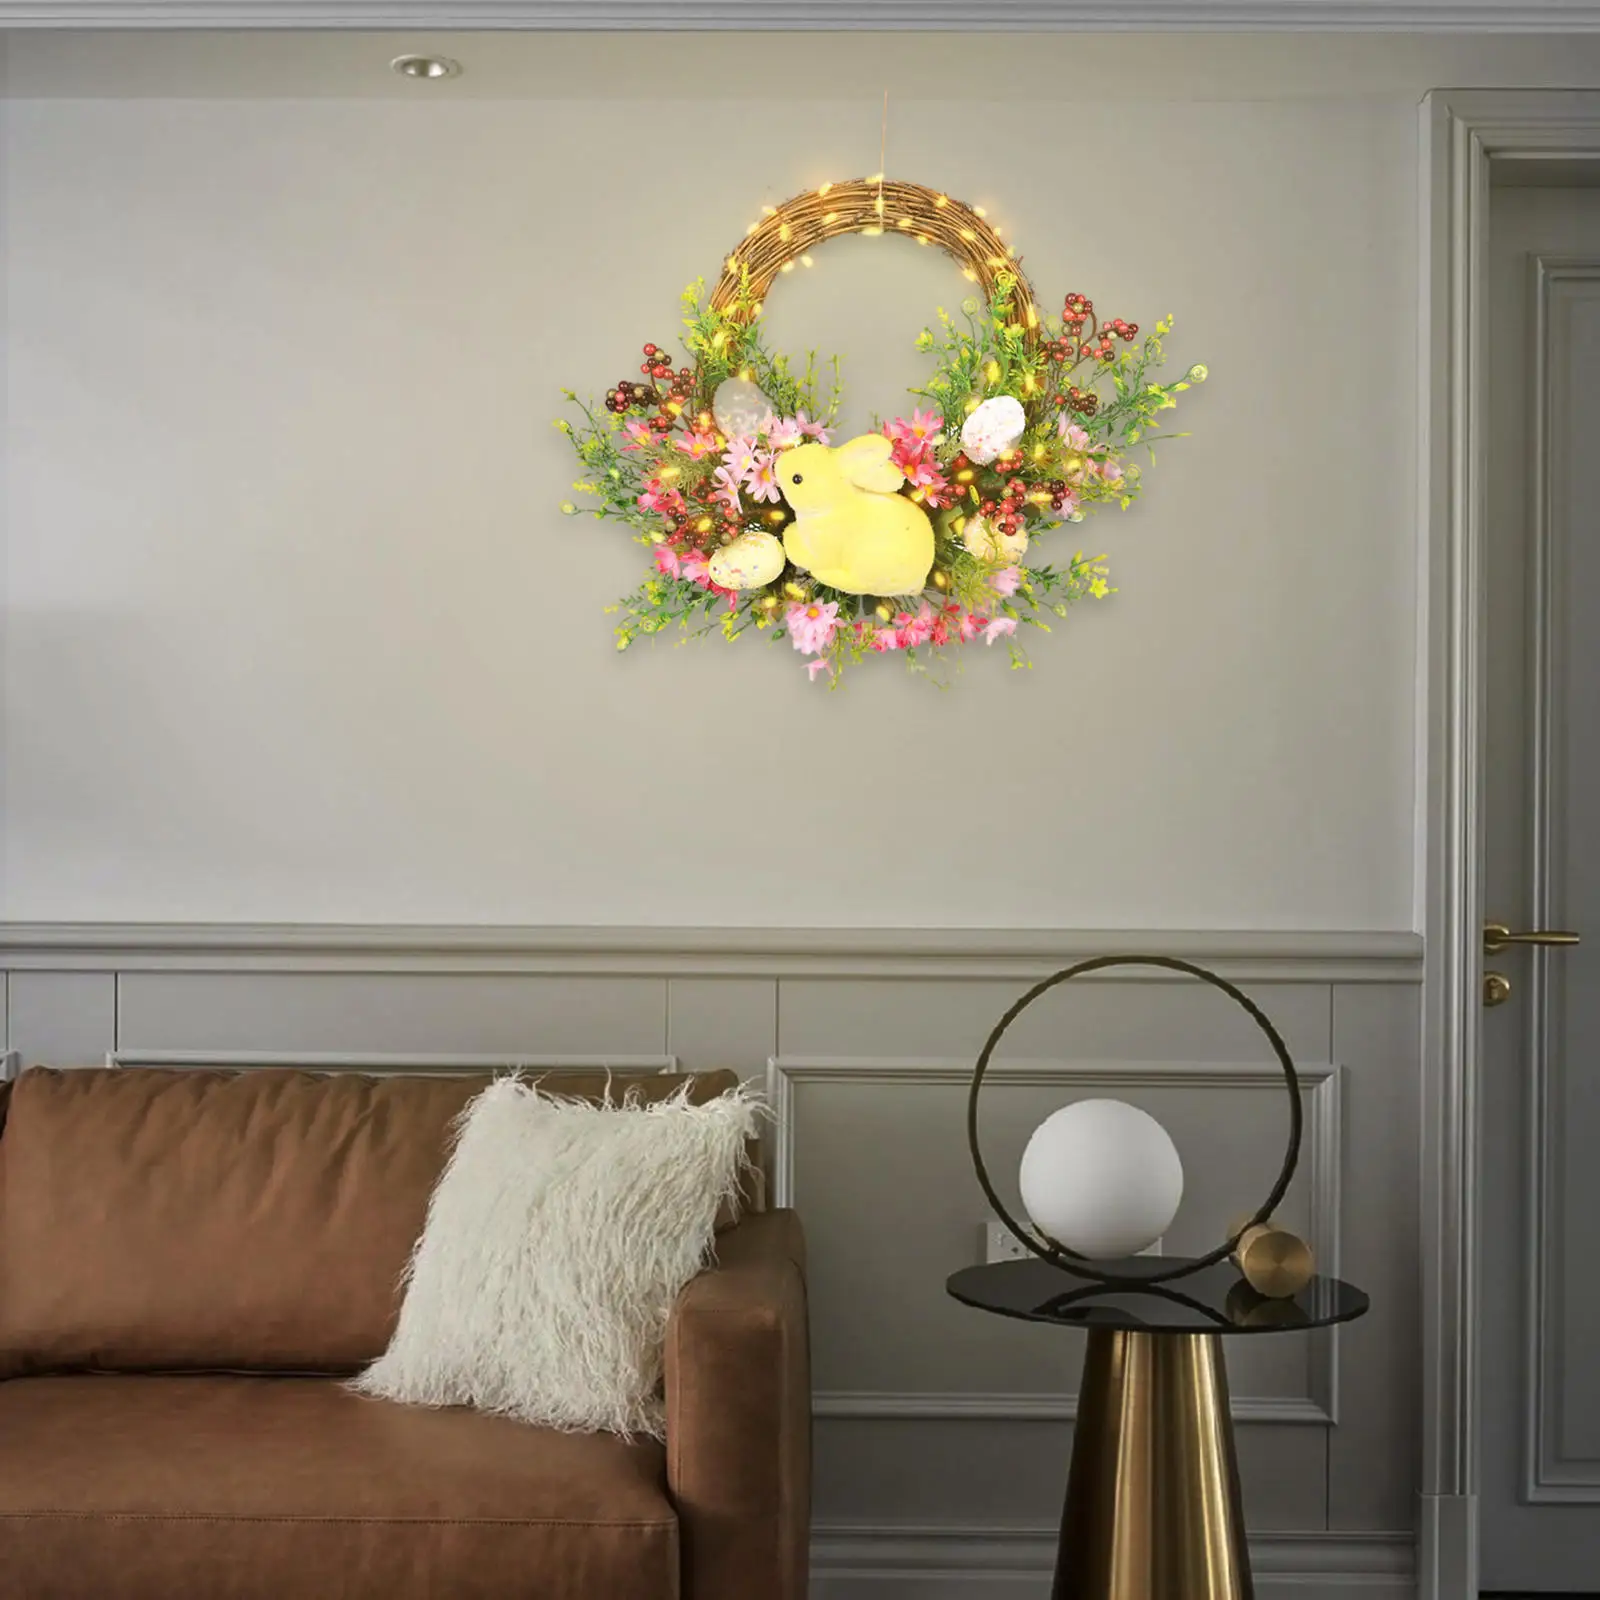 Artificial Easter Wreath Bunny Floral Easter Eggs String Lights Garland for Front Door Windows Wedding Party Wall Hanging